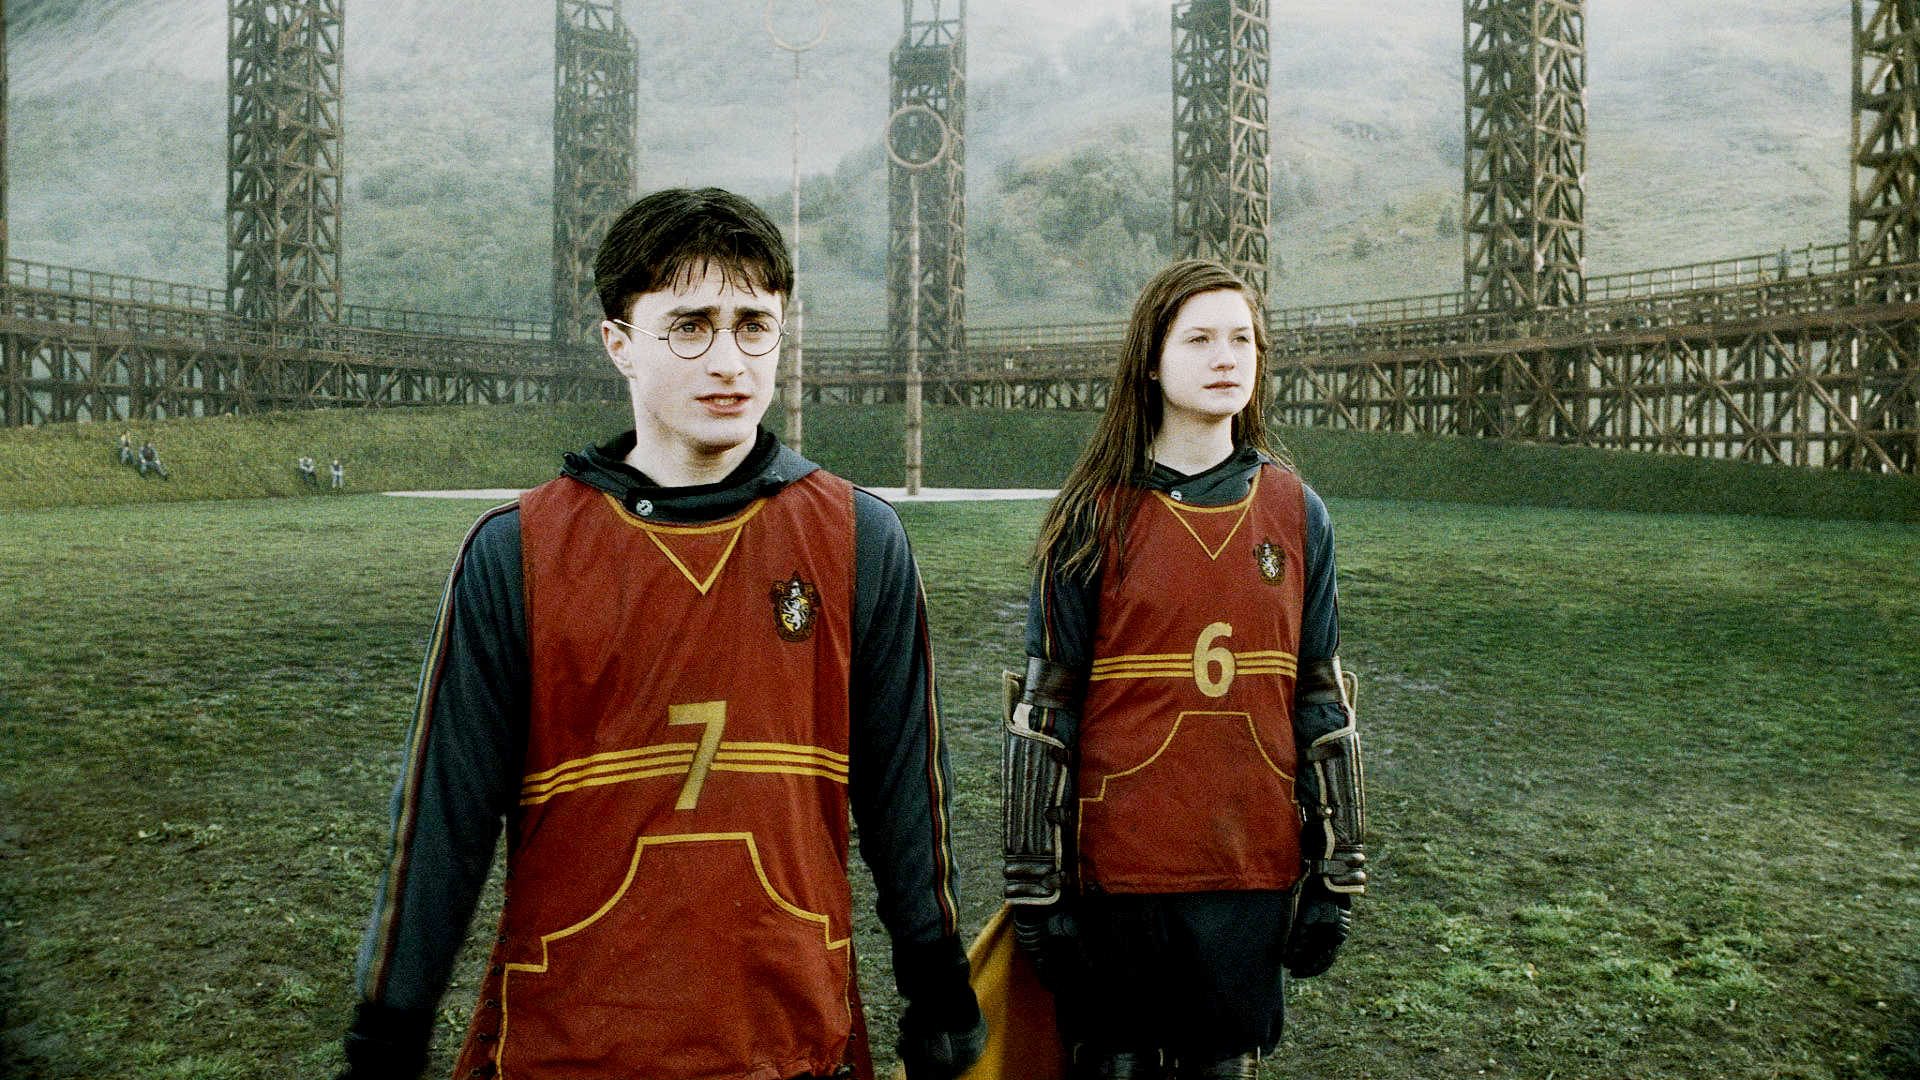 Daniel Radcliffe stars as Harry Potter and Bonnie Wright stars as Ginny Weasley in Warner Bros Pictures' Harry Potter and the Half-Blood Prince (2009)